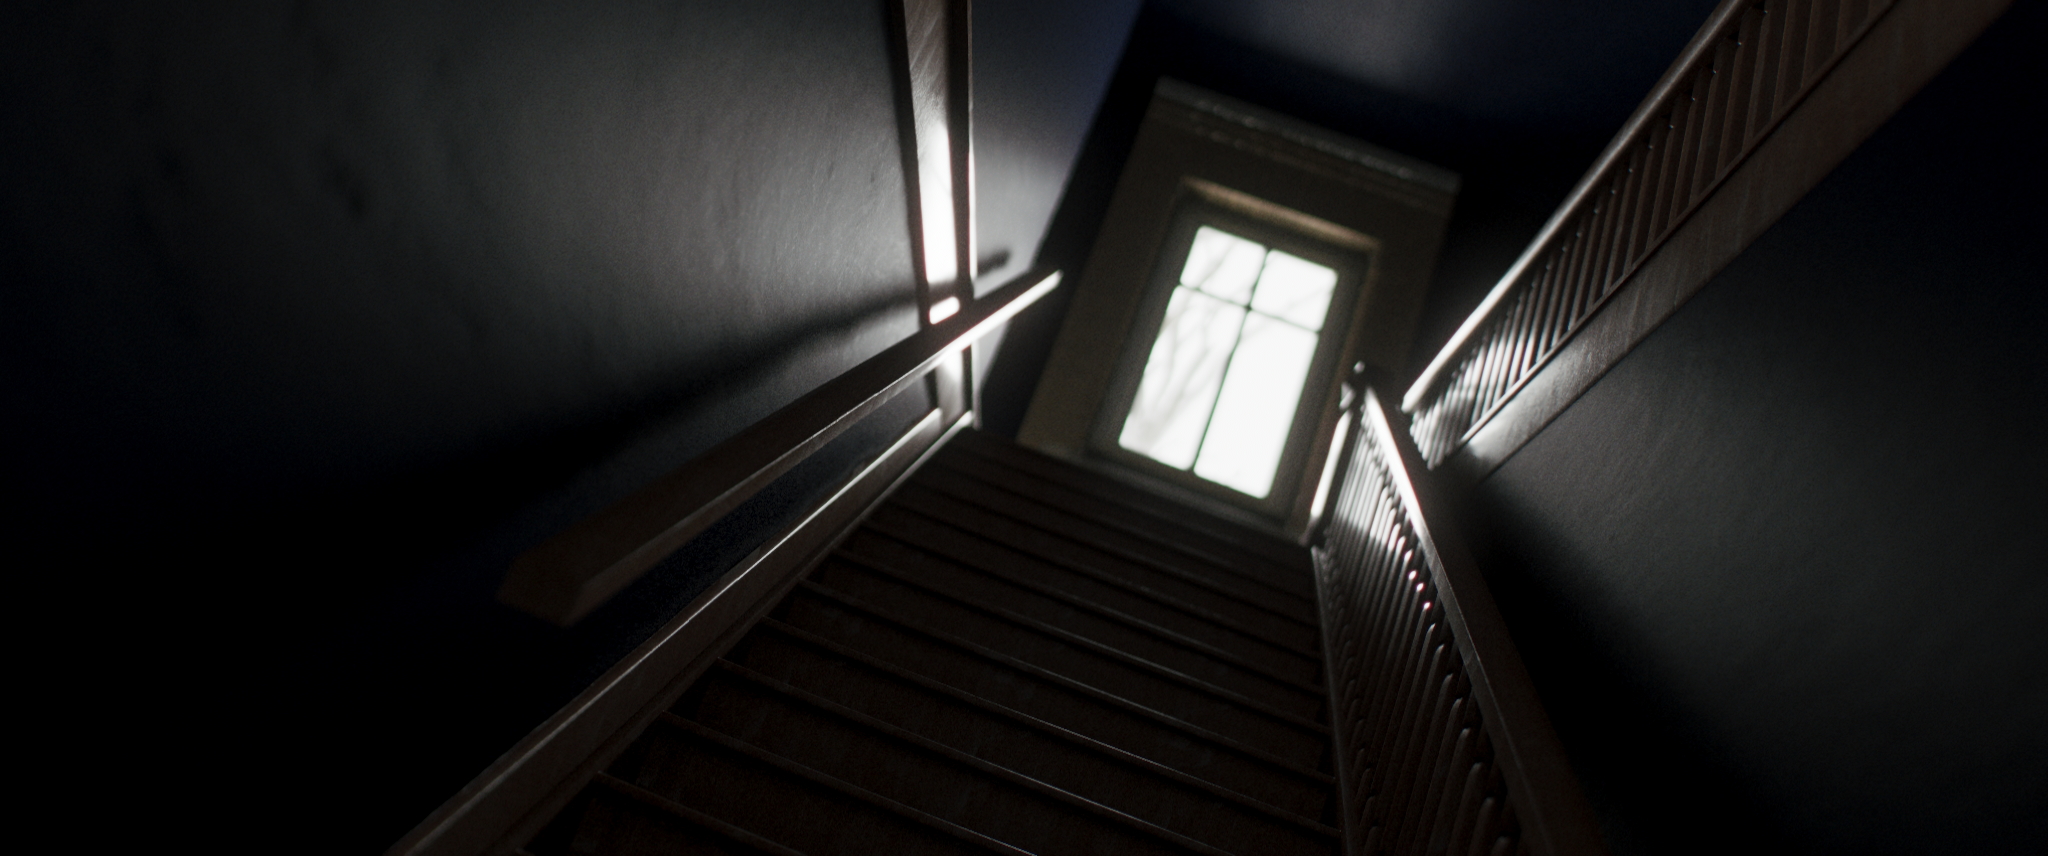 Parallel_StairCase_LookDev_08